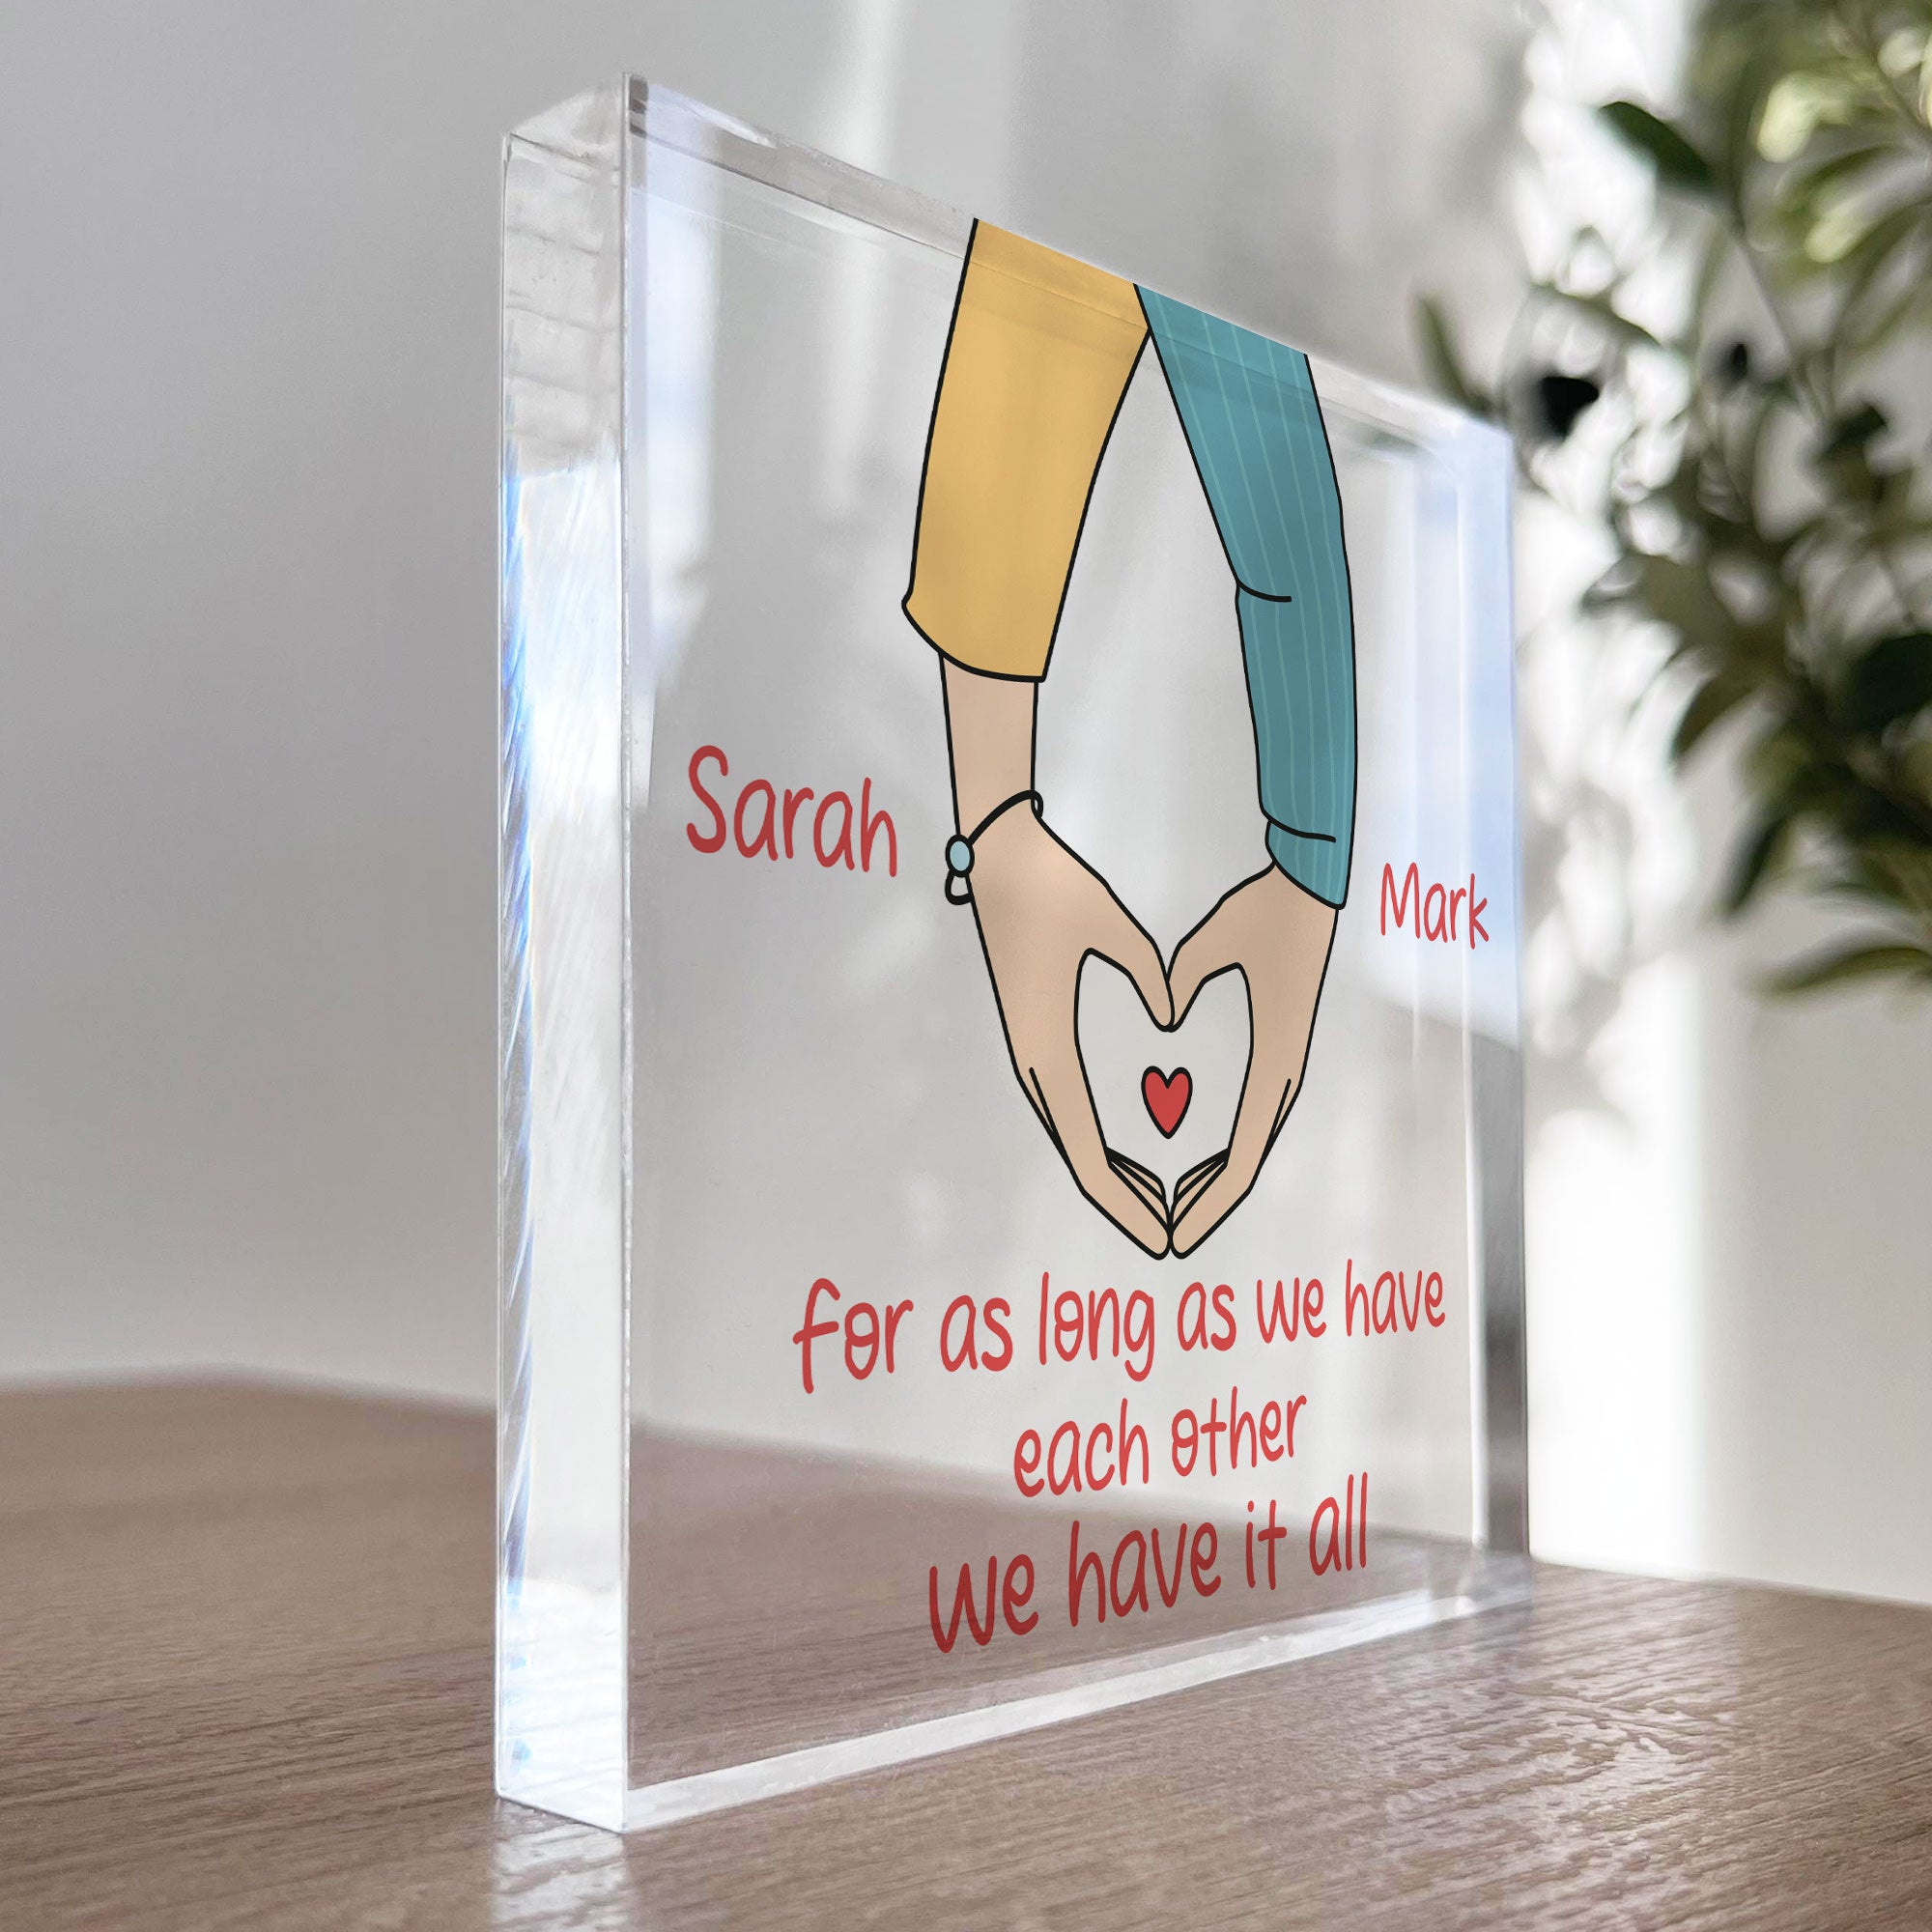 Personalised Gifts for Her Him Wife Couples Girlfriend Anniversary Present  Gifts | eBay